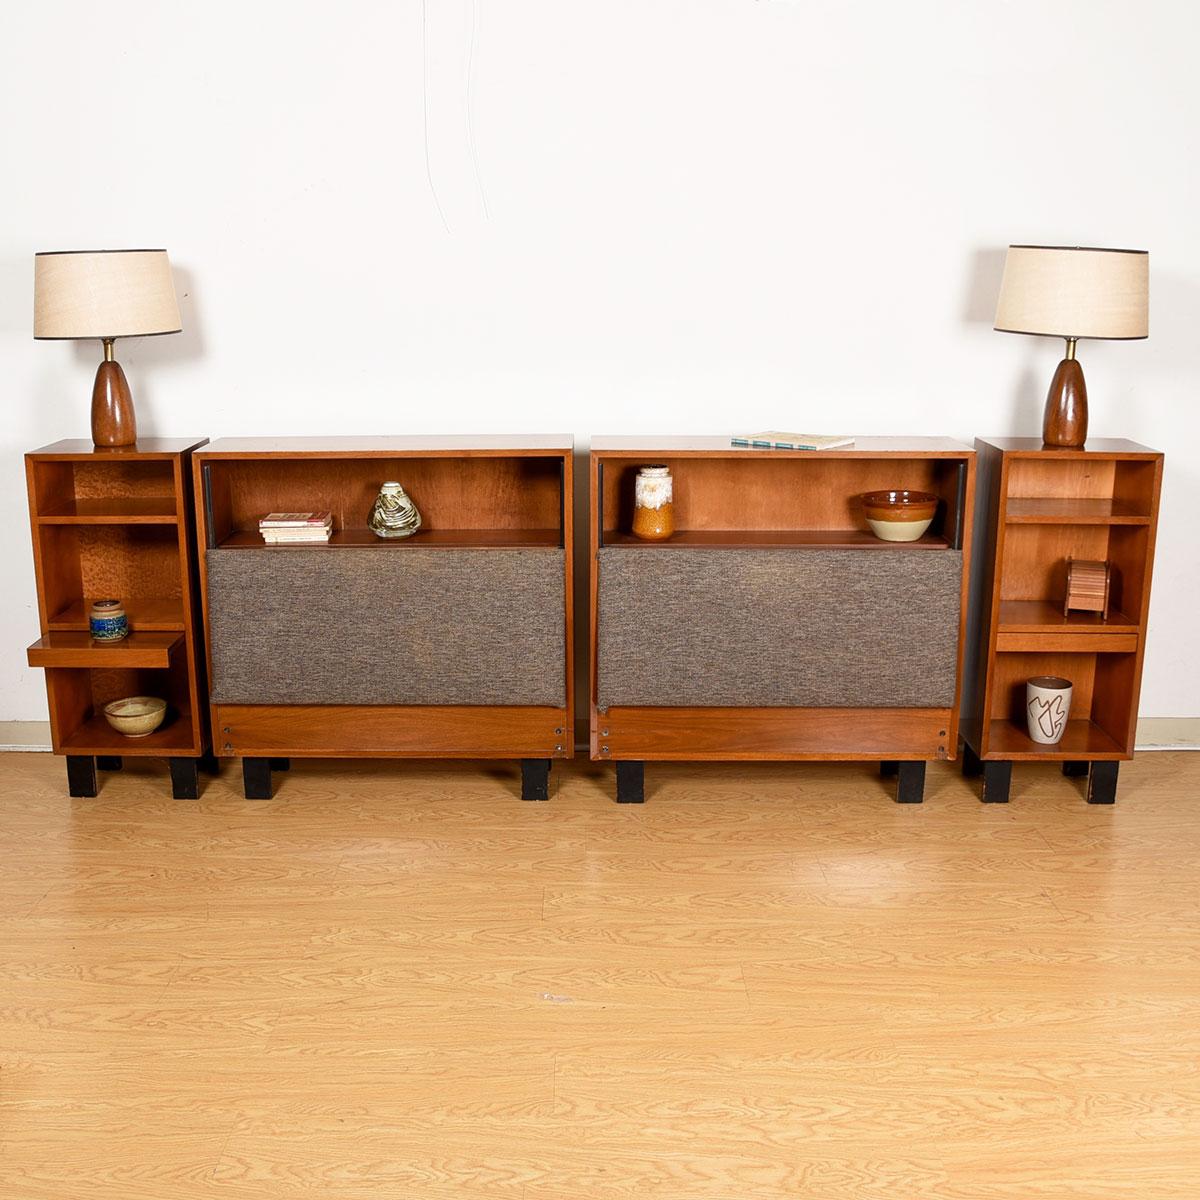 Pair of Mid-Century Modern Headboards & Nightstands by George Nelson For Sale 7